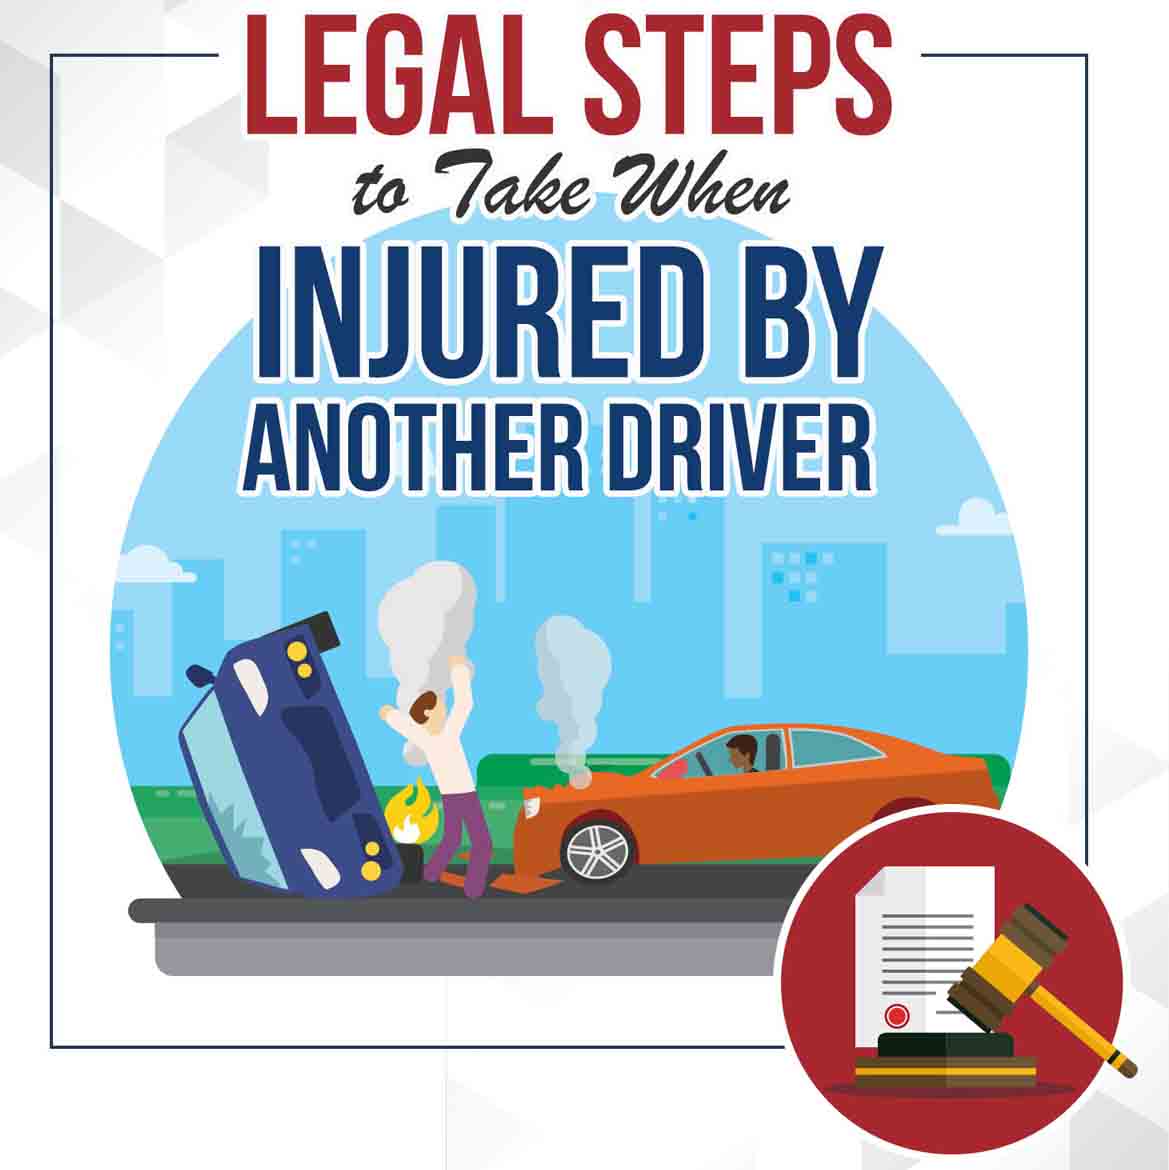 Legal Steps to Take When Injured by Another Driver